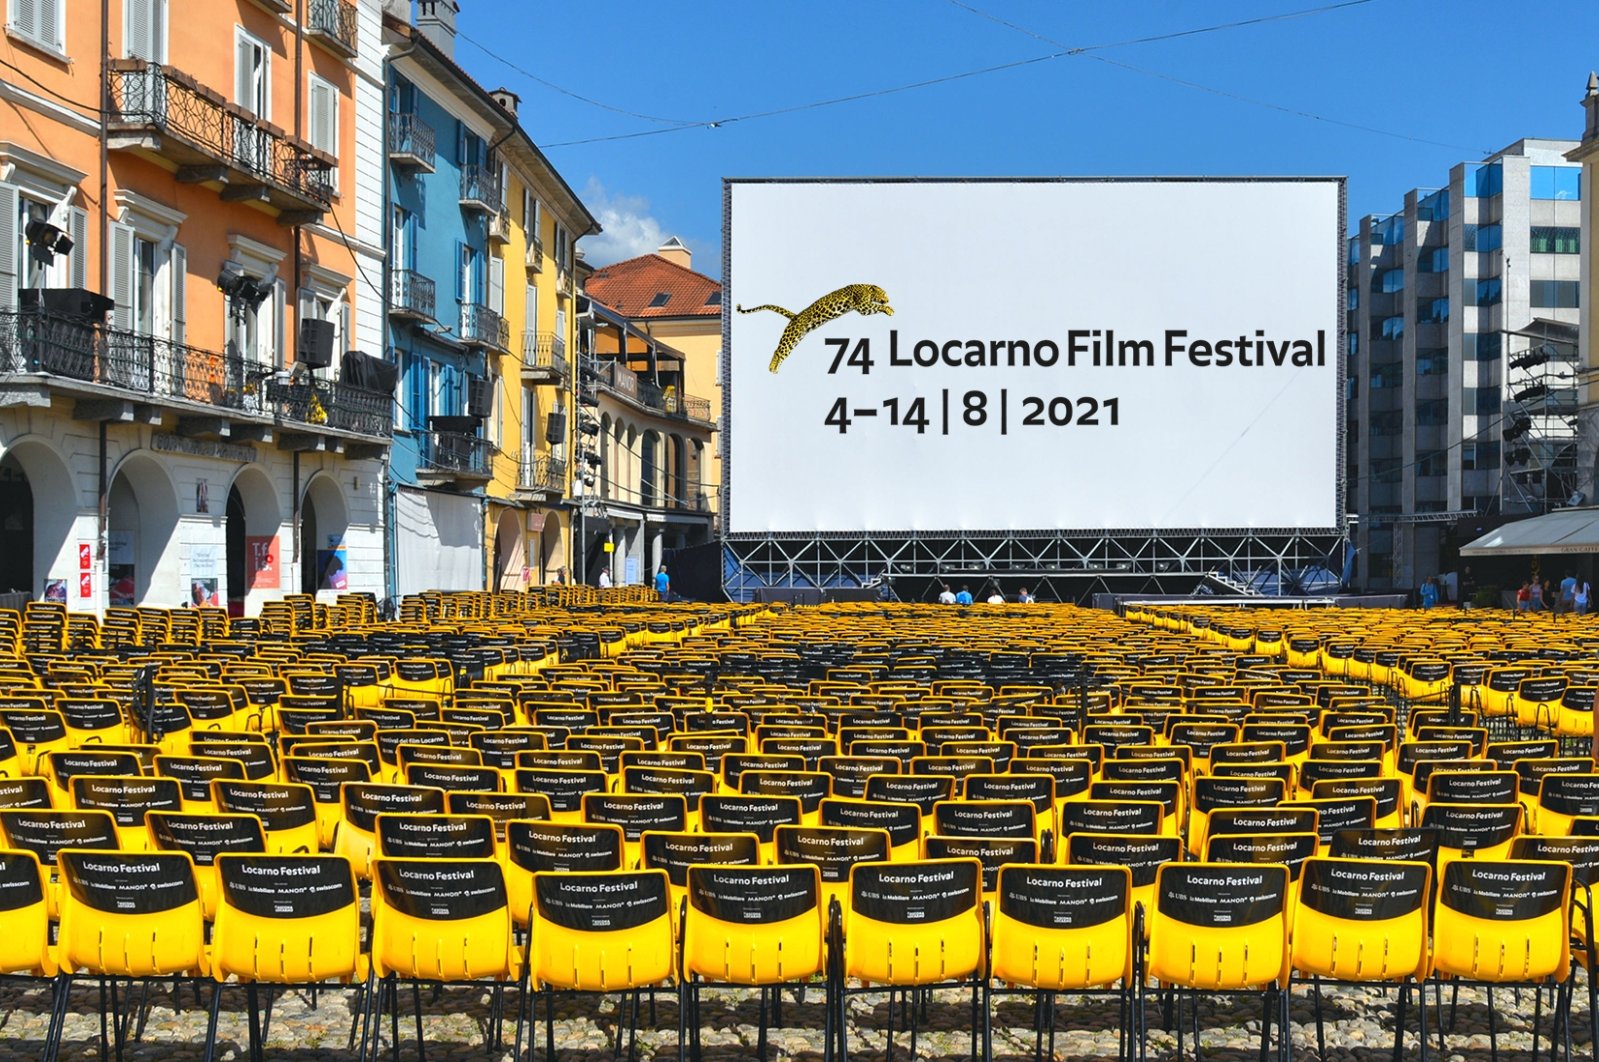 The large open-air screen and yellow chairs at the Piazza Grande square with old buildings in Lorcarno for the Annual International Film Festival, Switzerland, August 15, 2019. (Shutterstock Photo) 